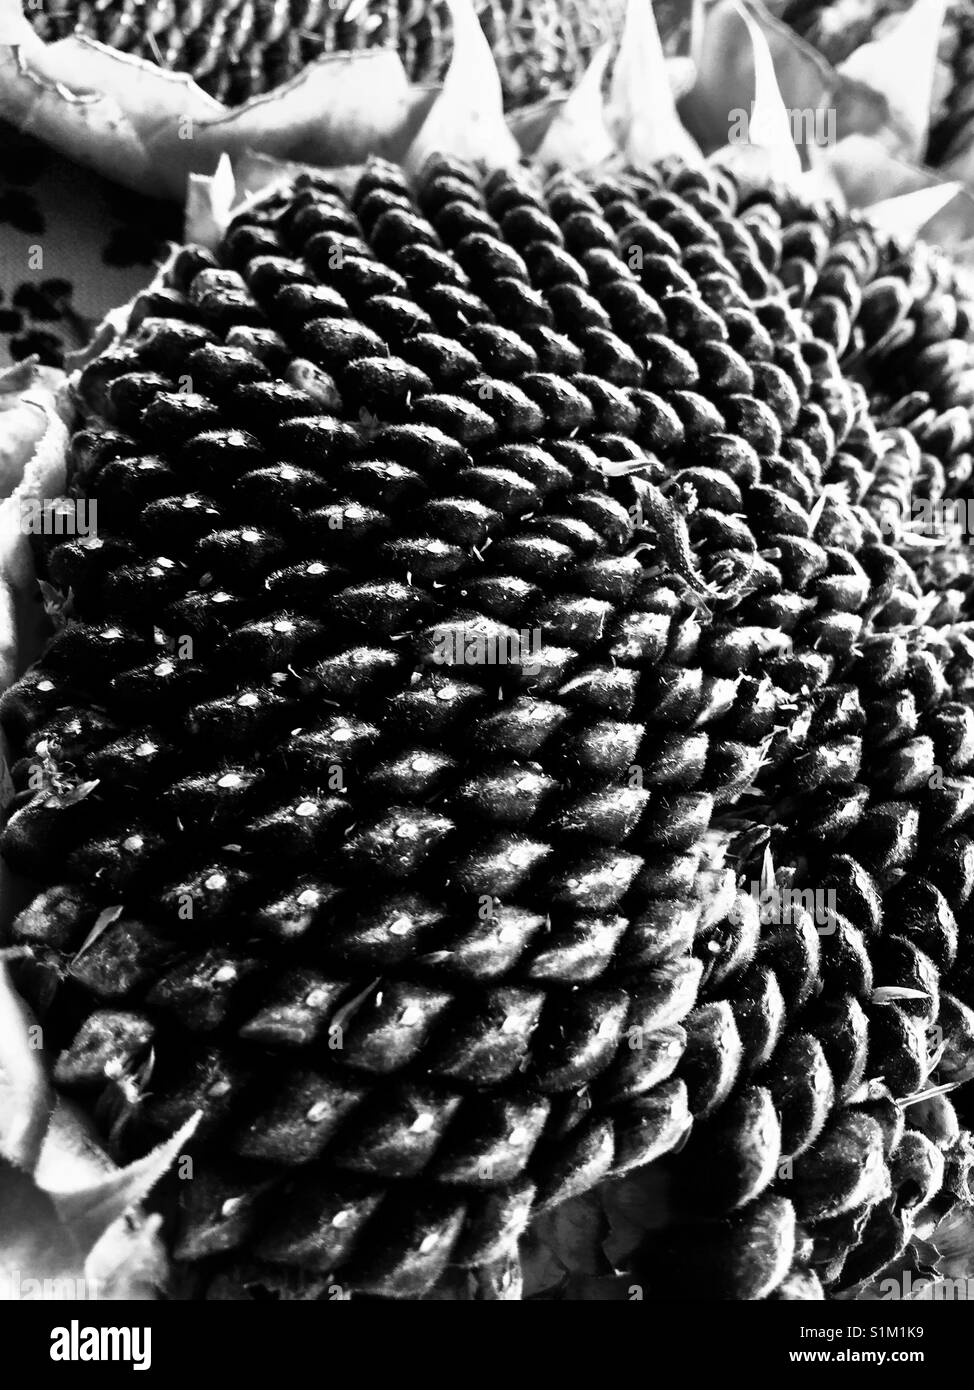 Drying Sunflower Seeds in Black and White Stock Photo